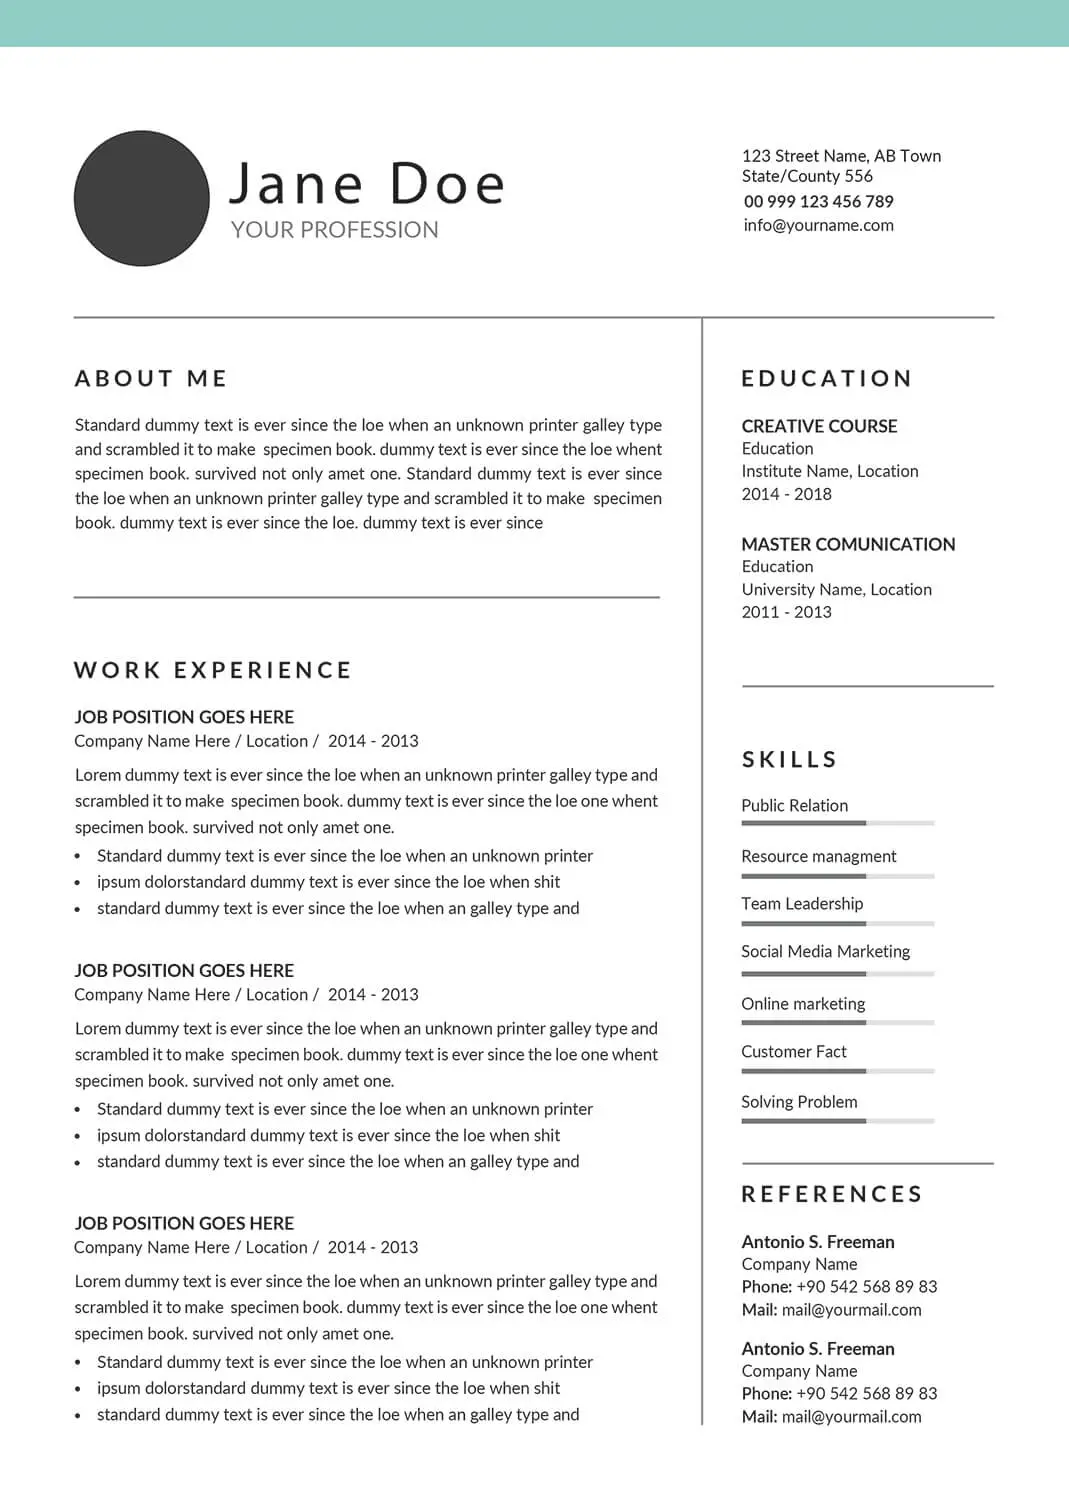 Systems Analyst Resume Templates